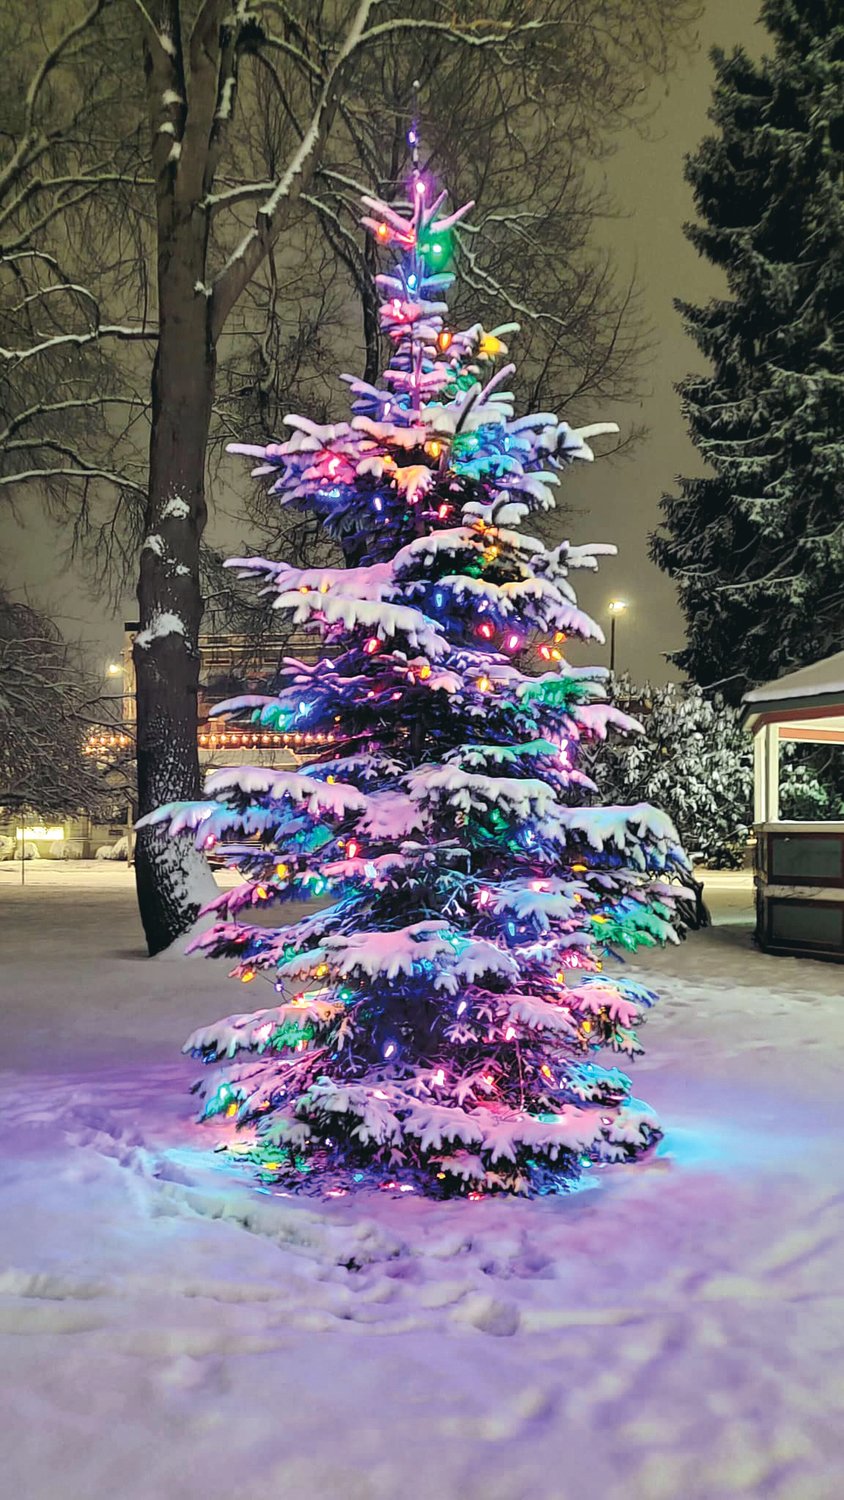 Centralia Mayor Max Vogt provided this photo of the Christmas tree in George Washington Park.